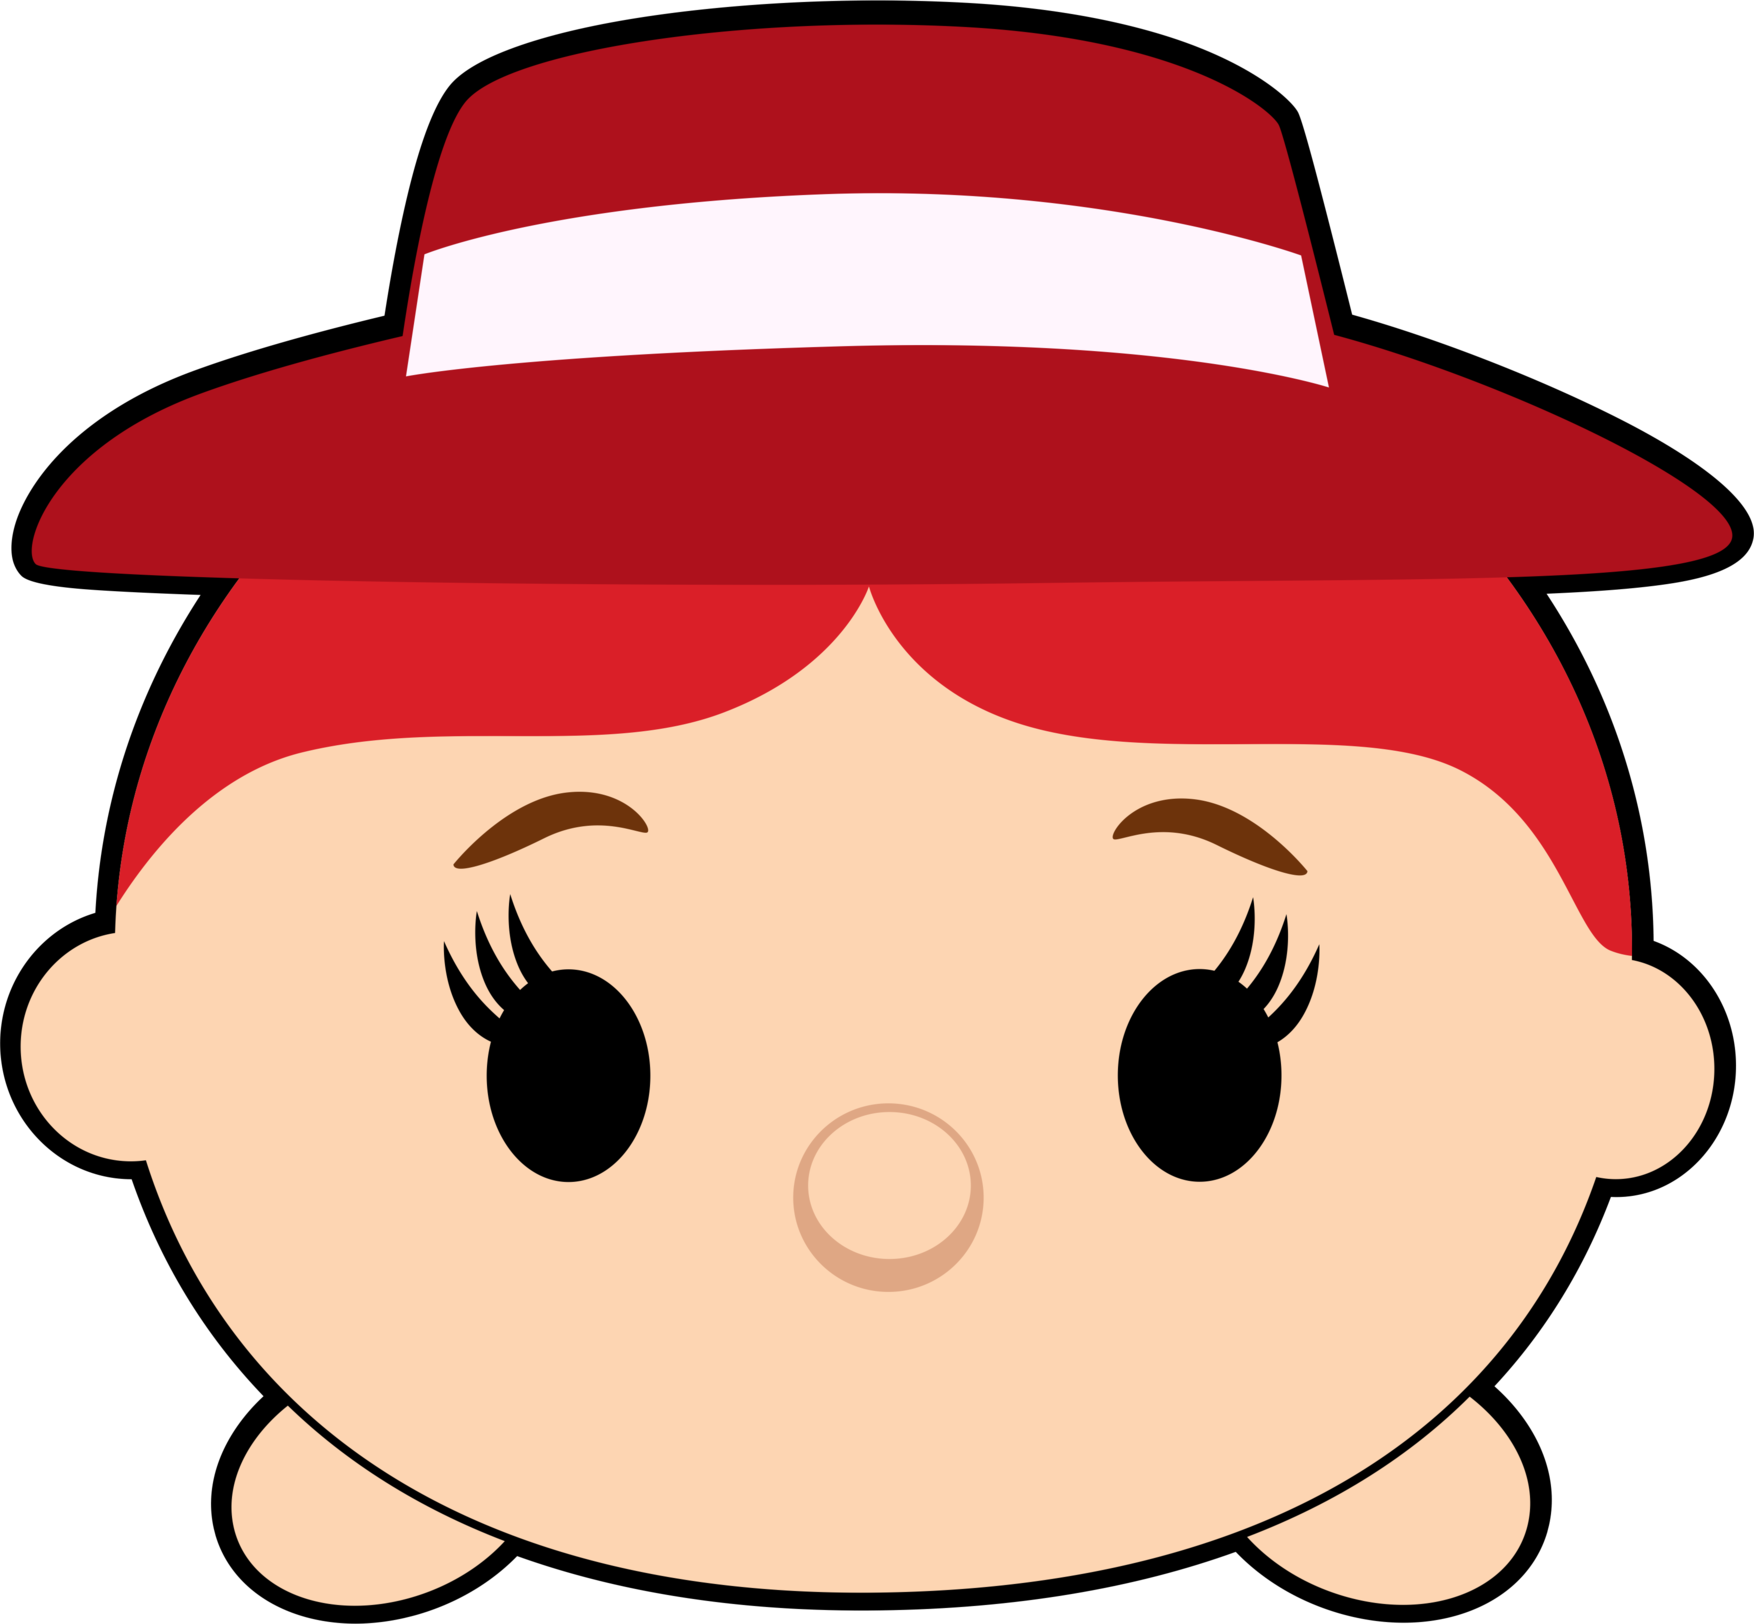 Red Hatted Tsum Tsum Character PNG